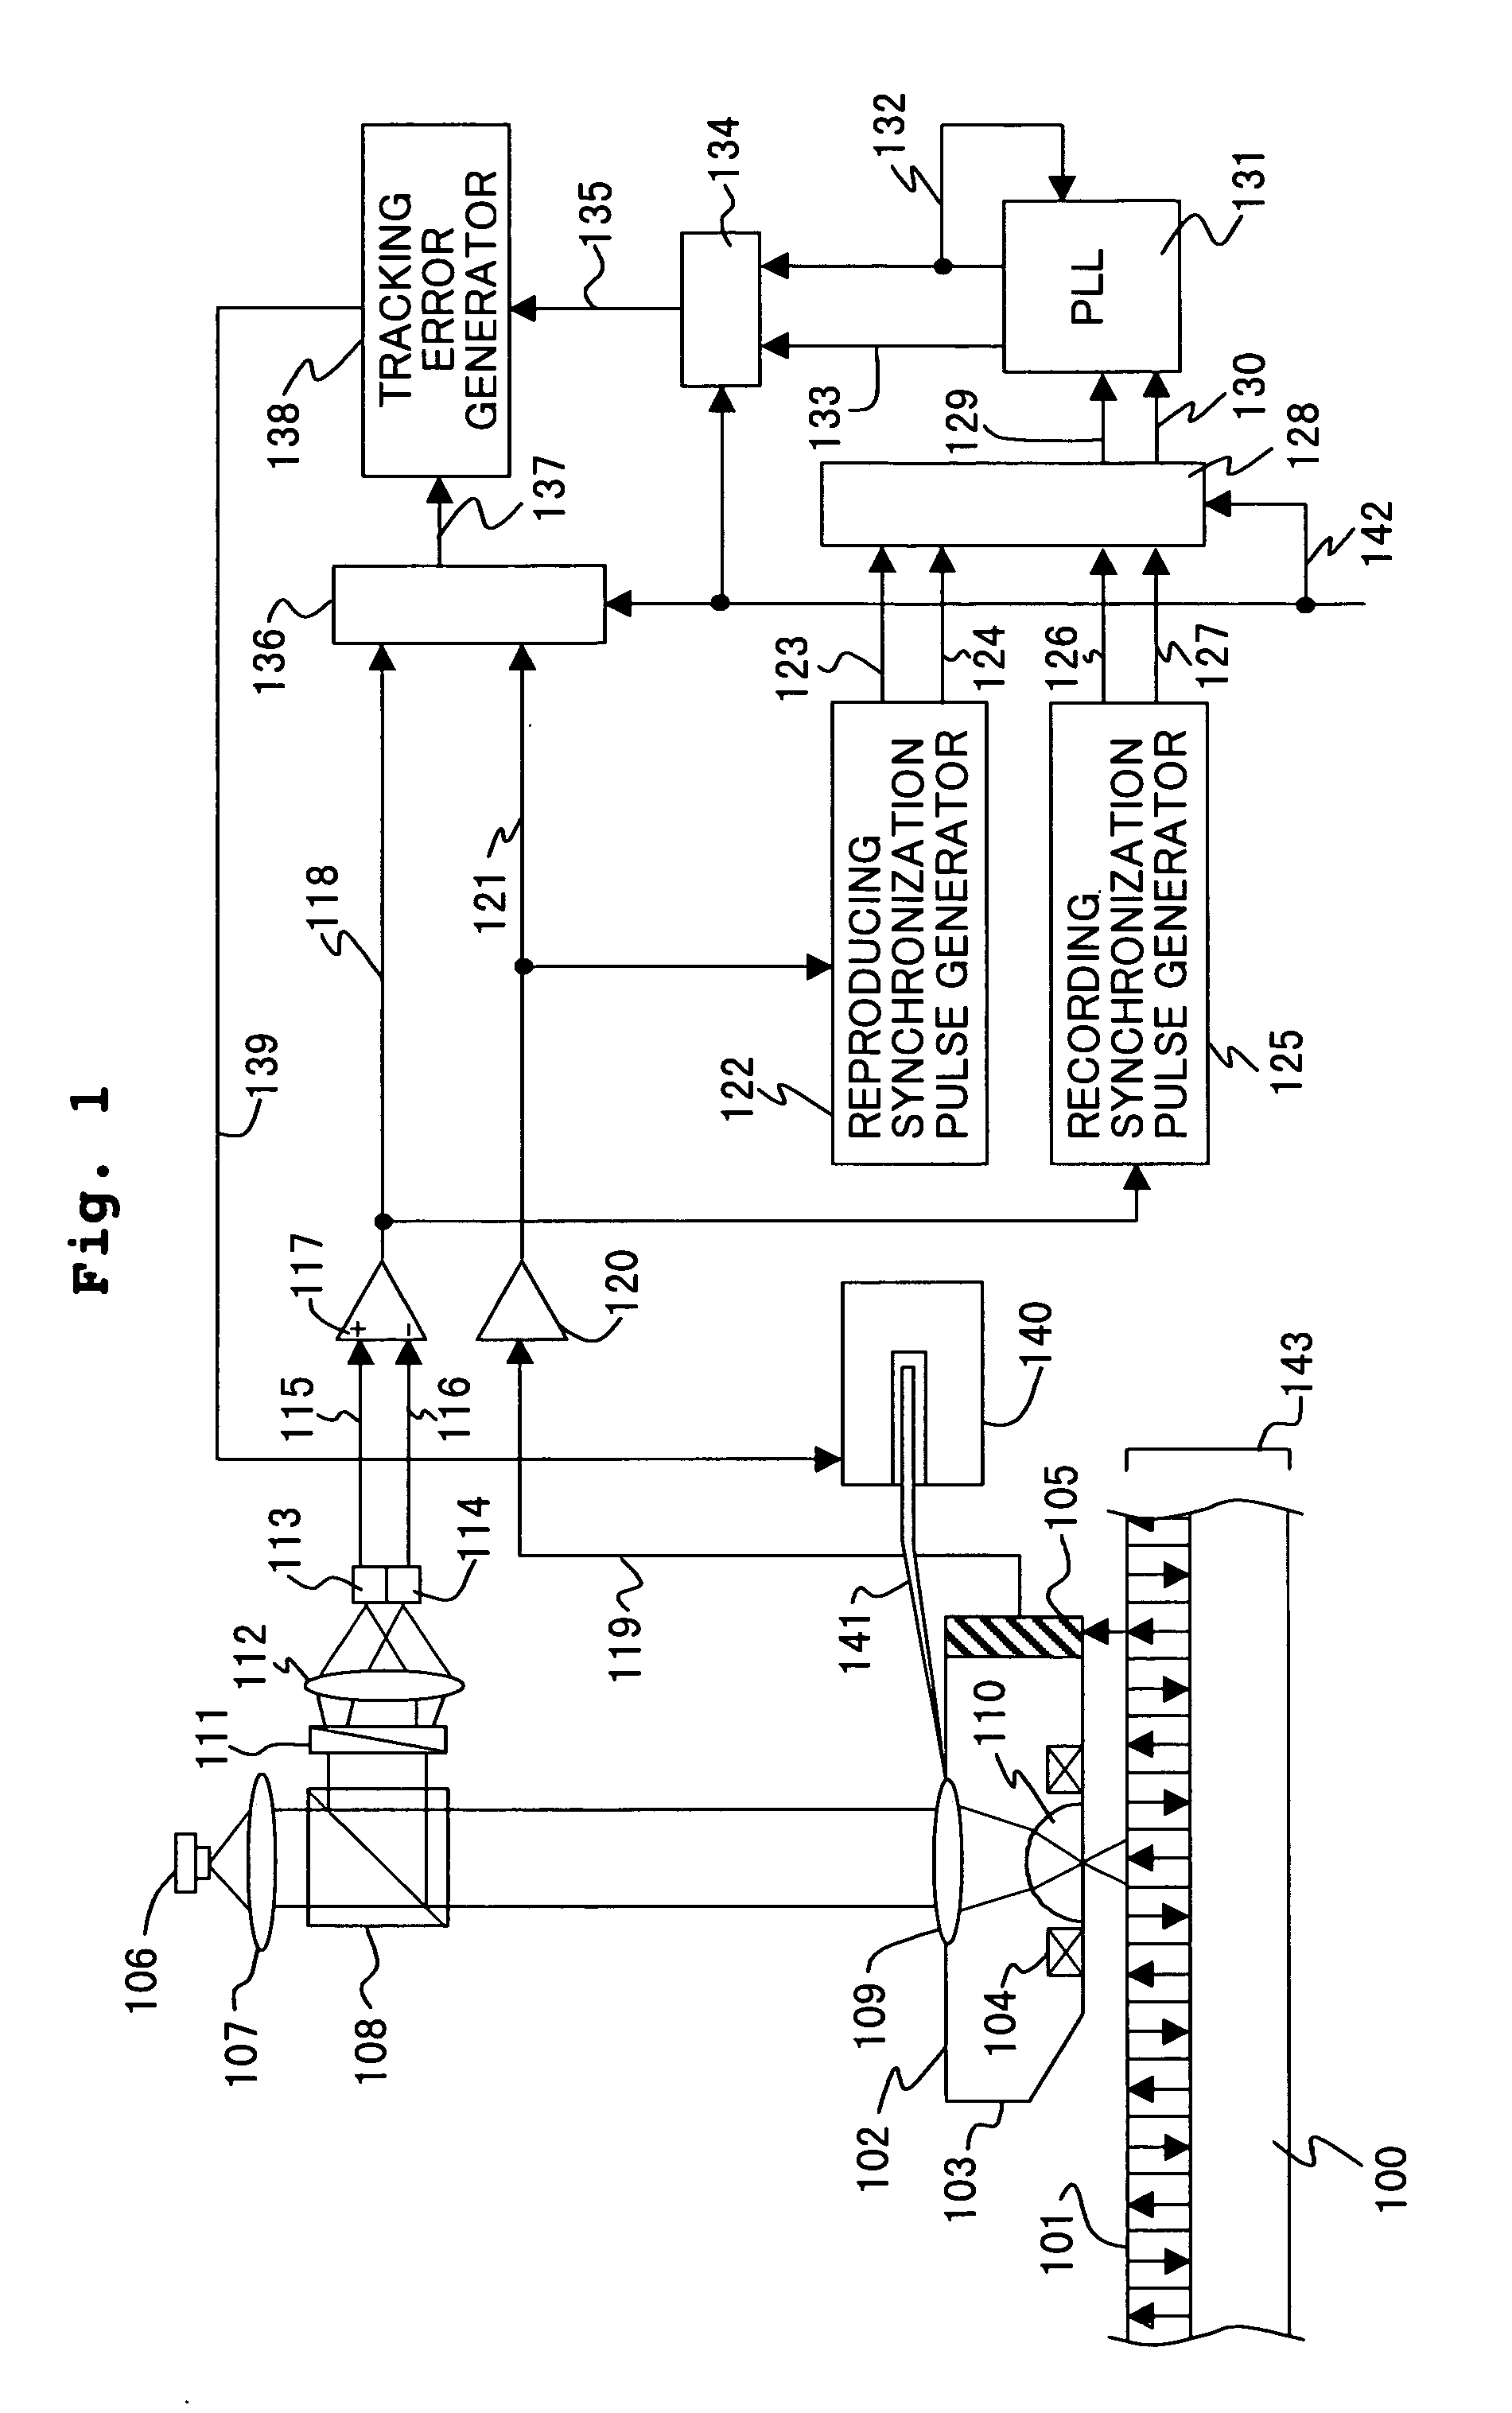 Information recording medium with magnetic marks, recording and reproducing apparatus therefor, and head positioning method using detected magnetic leakage fields from the magnetic marks